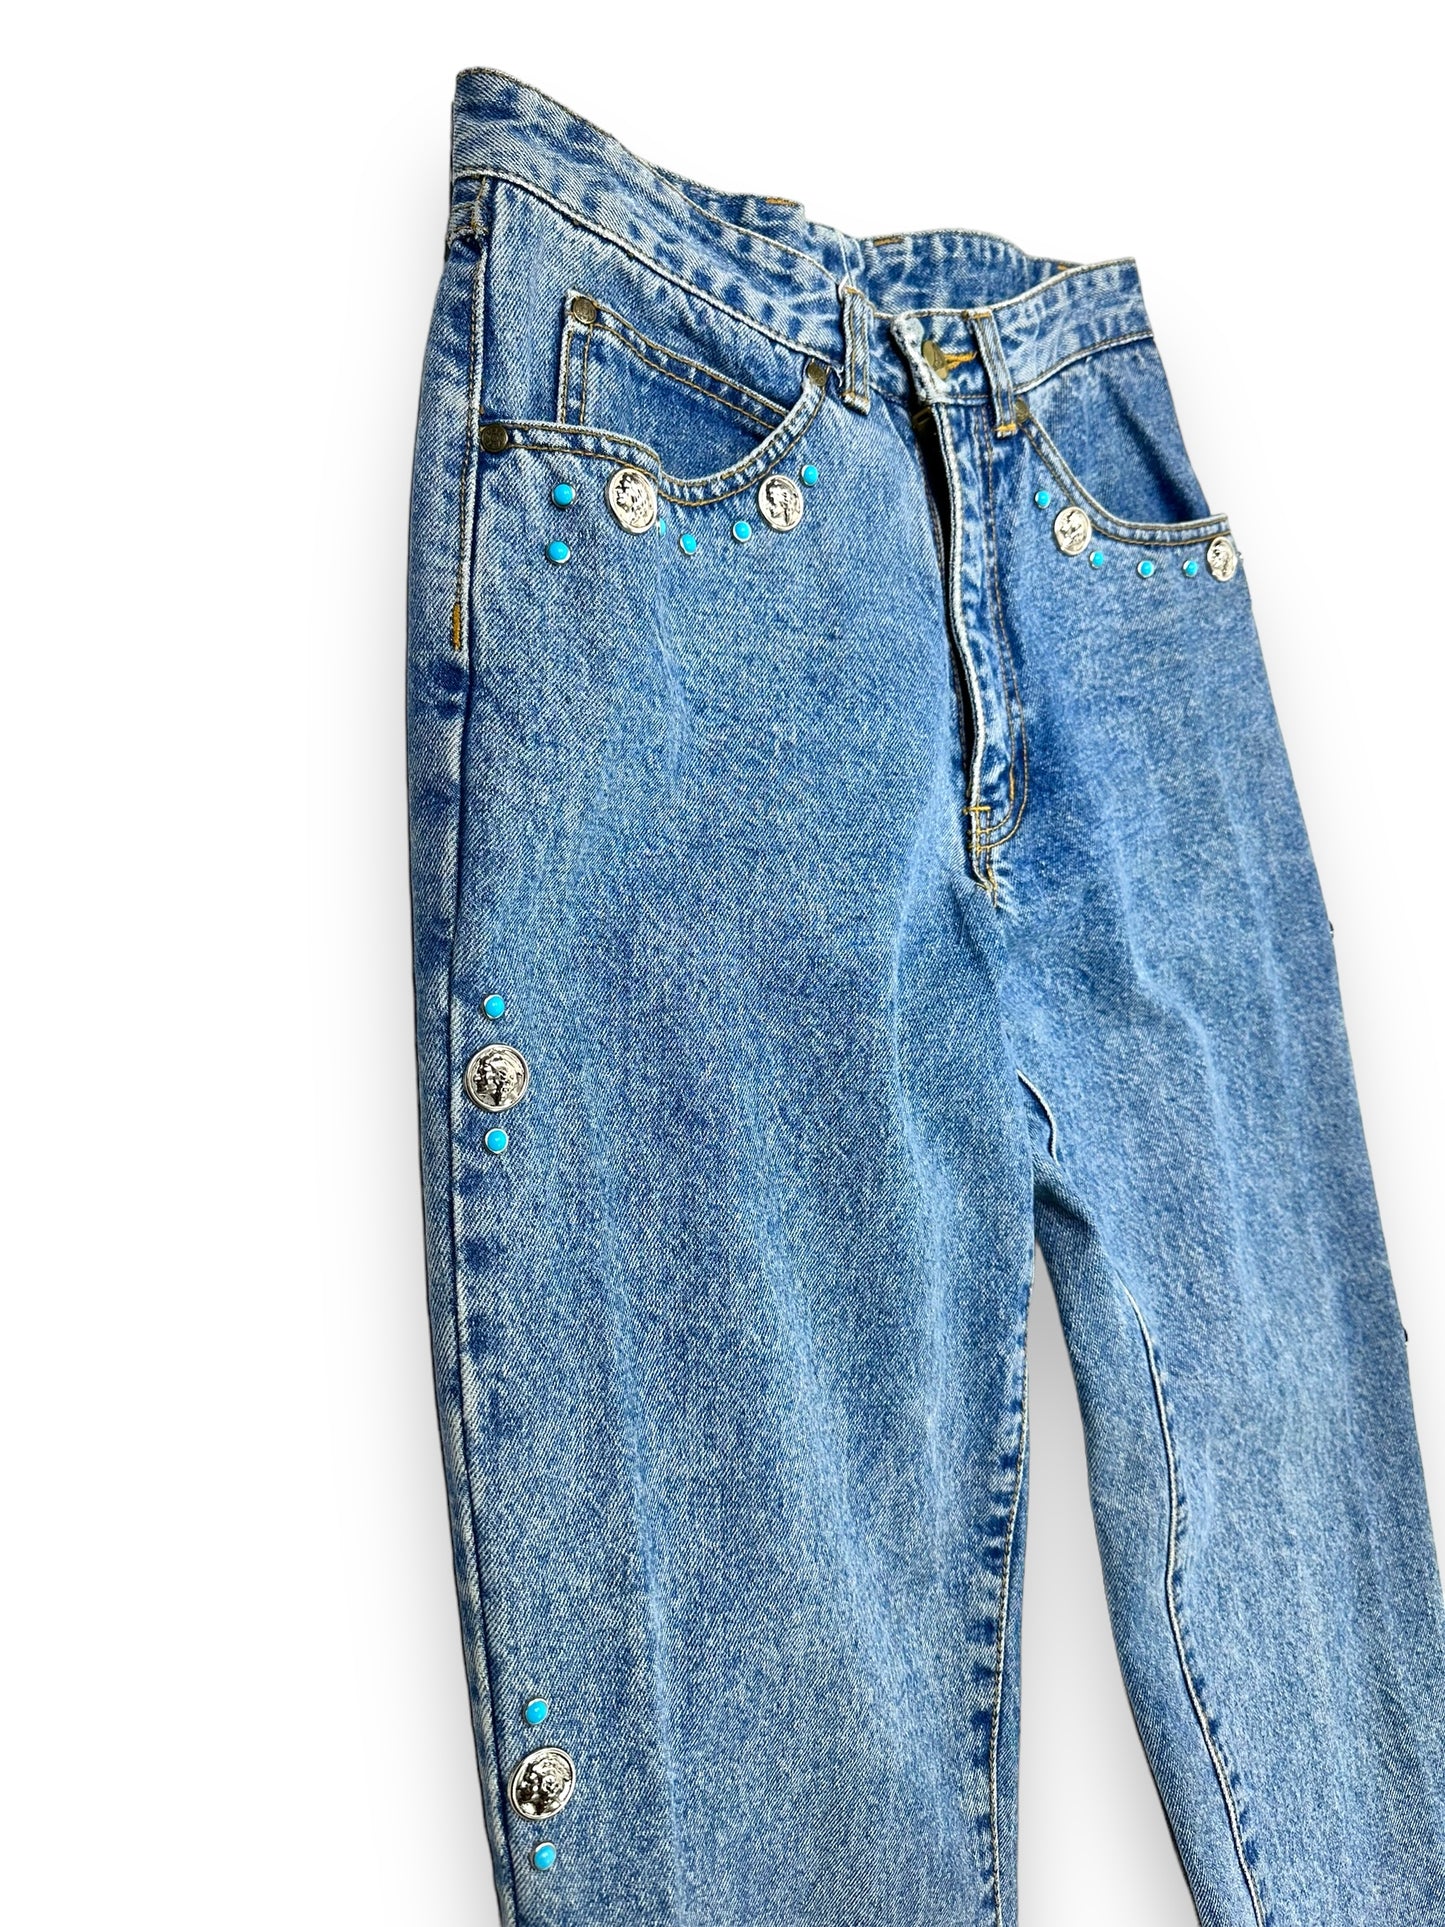 1980s “Pepe” Coin and Gem  “Betty” Jeans